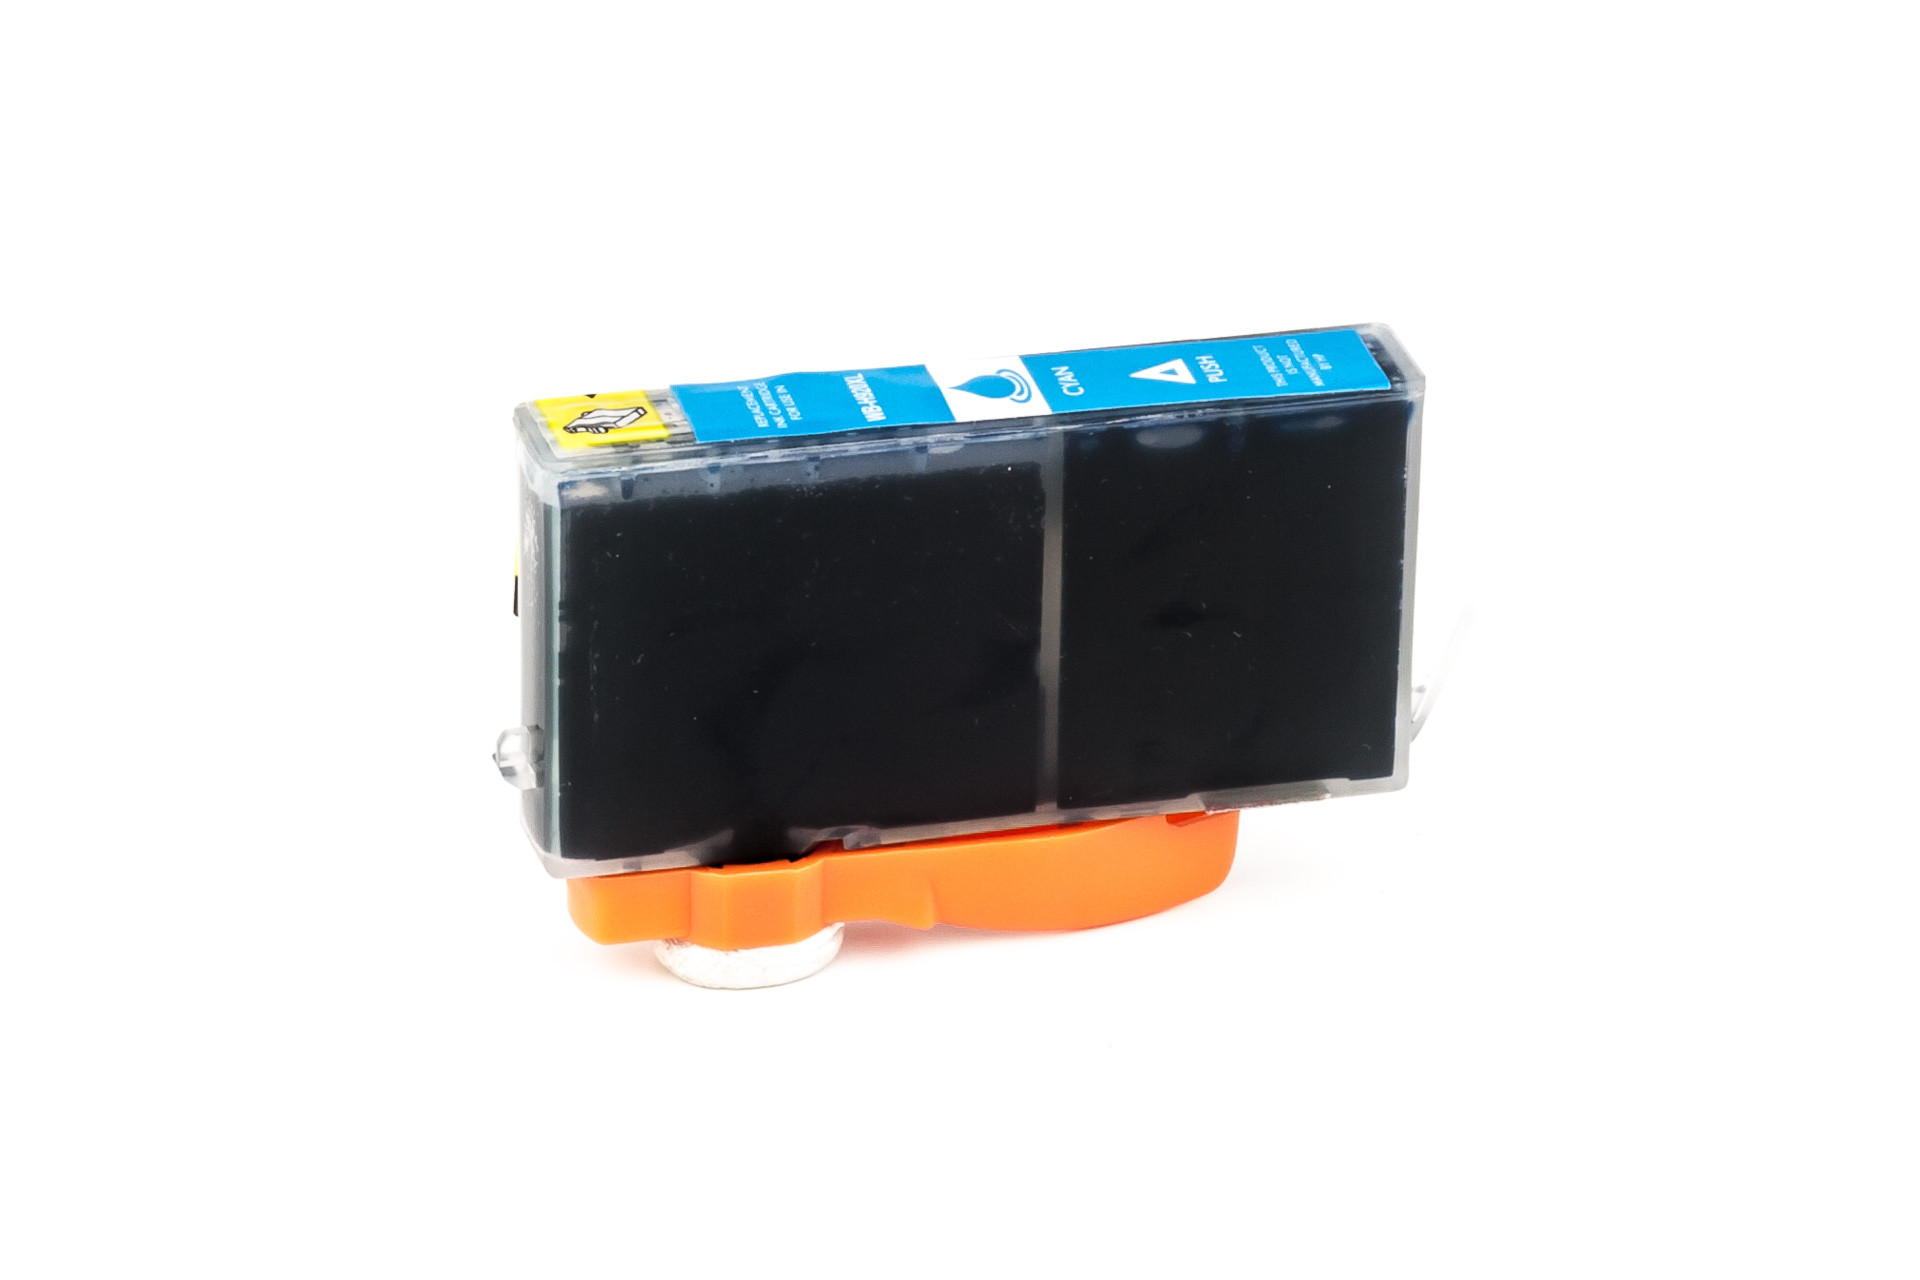 Ink cartridge (alternative) compatible with HP CD972AE/CD 972 AE - 920XL - Officejet 6000 cyan